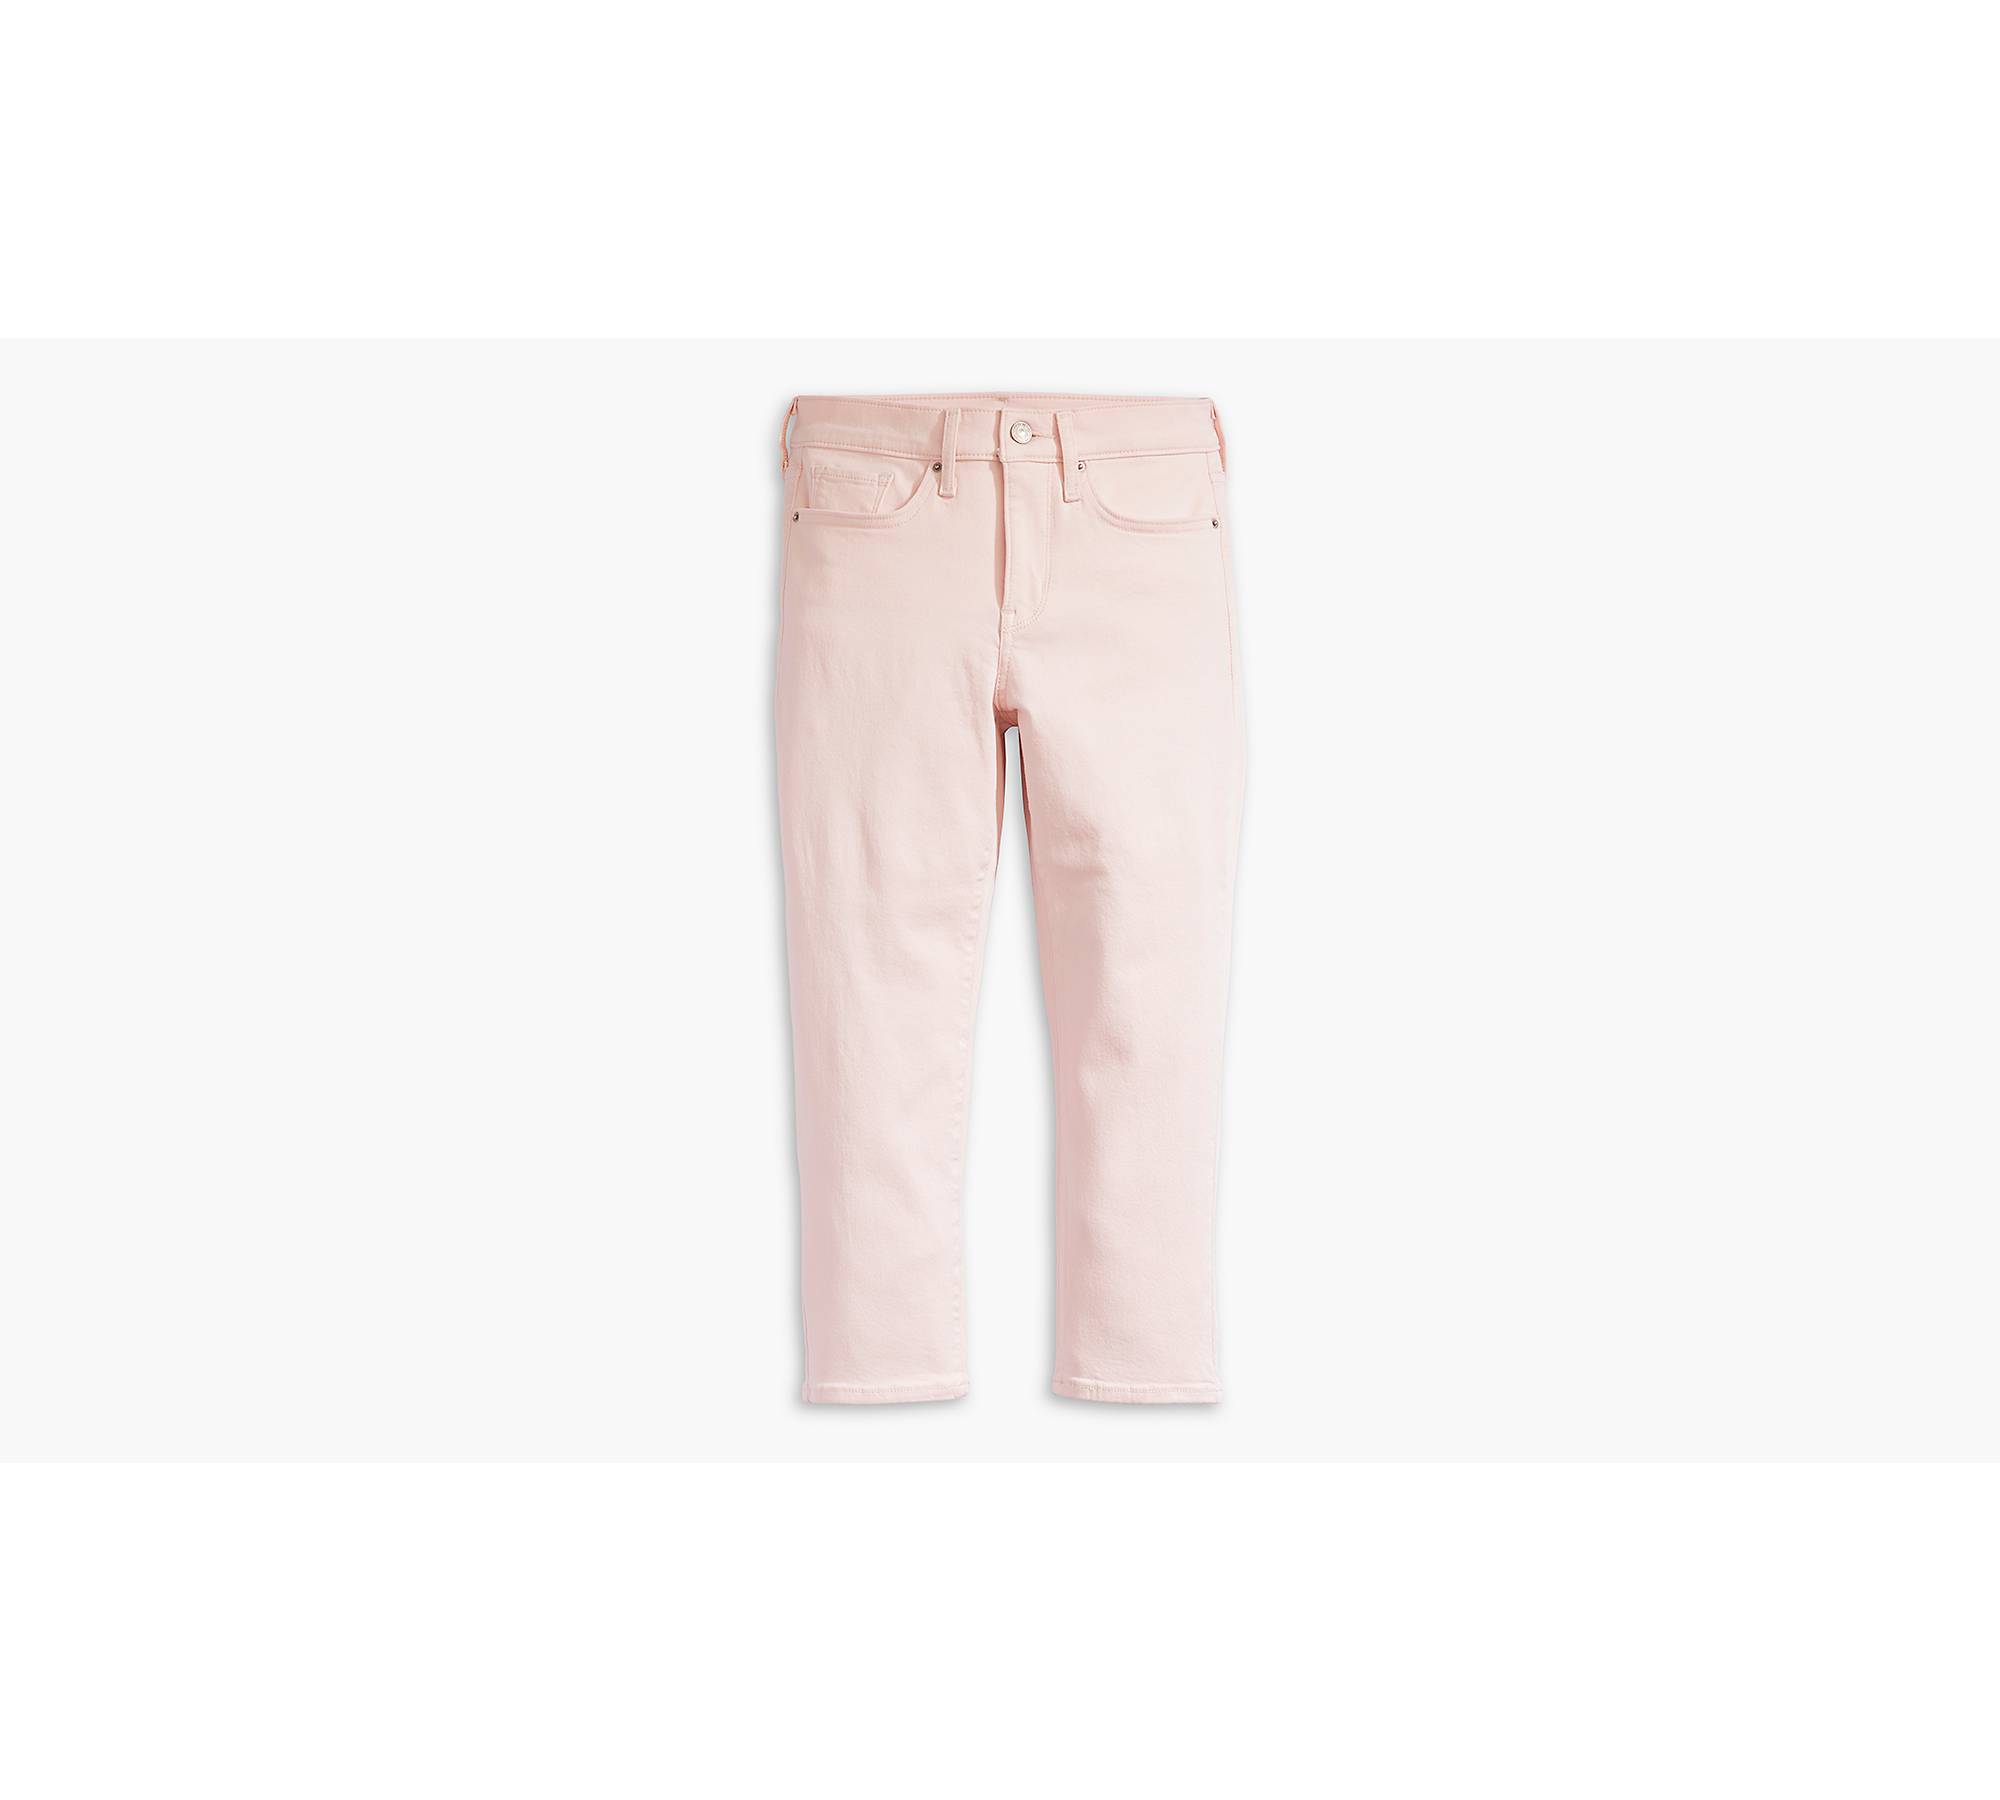 Women's Stretch Cropped Chino Jeans Slim 3/4 Length Capri Trousers Pastel  Pink 14-24